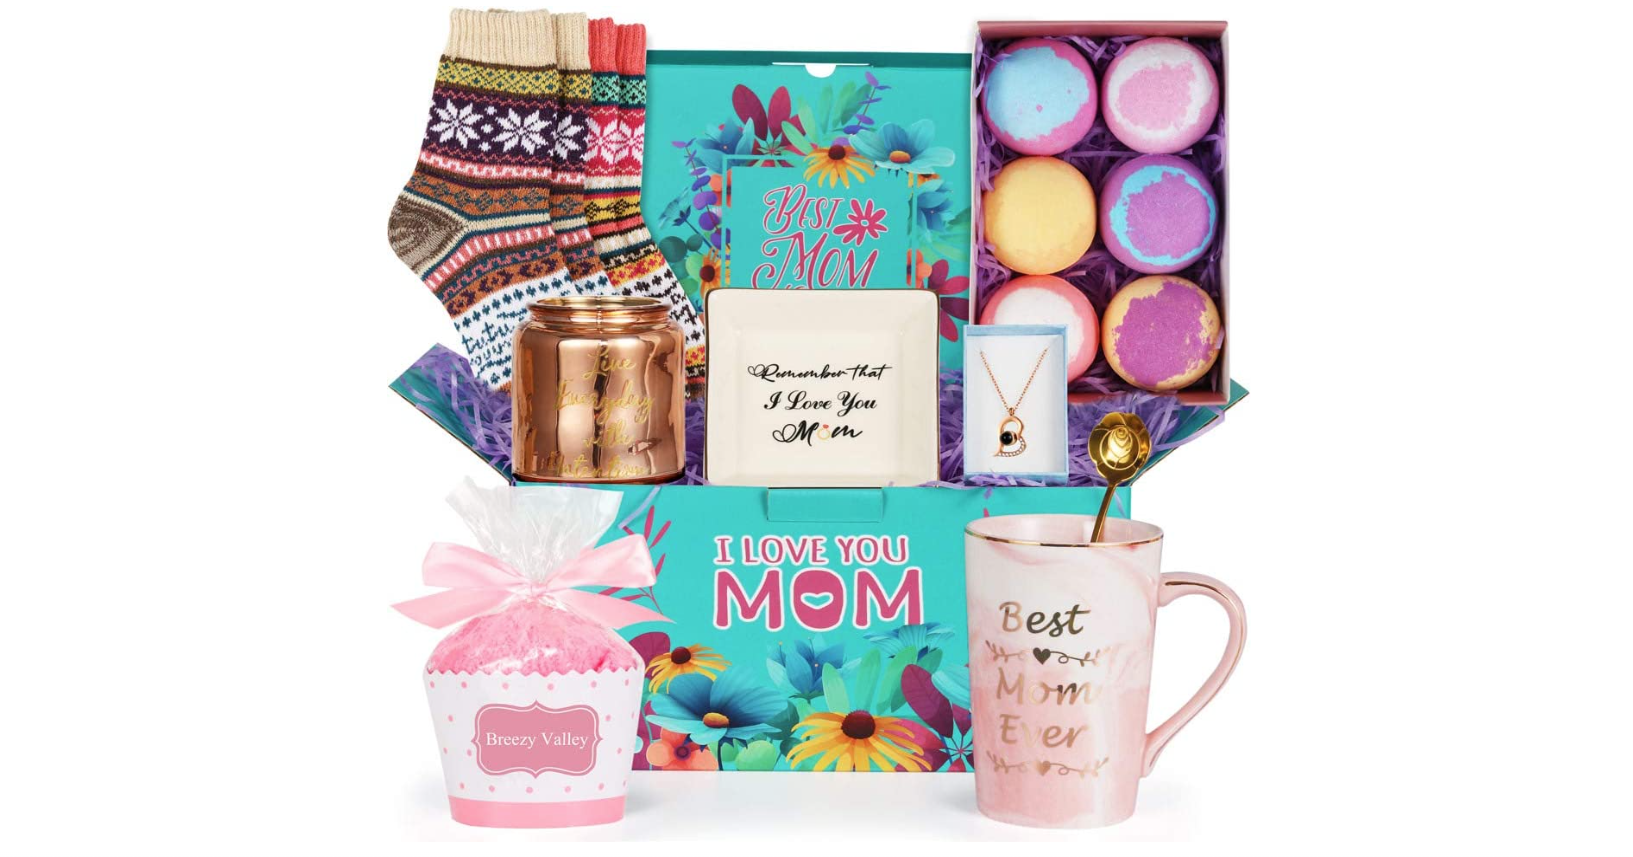 21 Best Mother's Day Gifts for Moms Who Love to Cook - PureWow